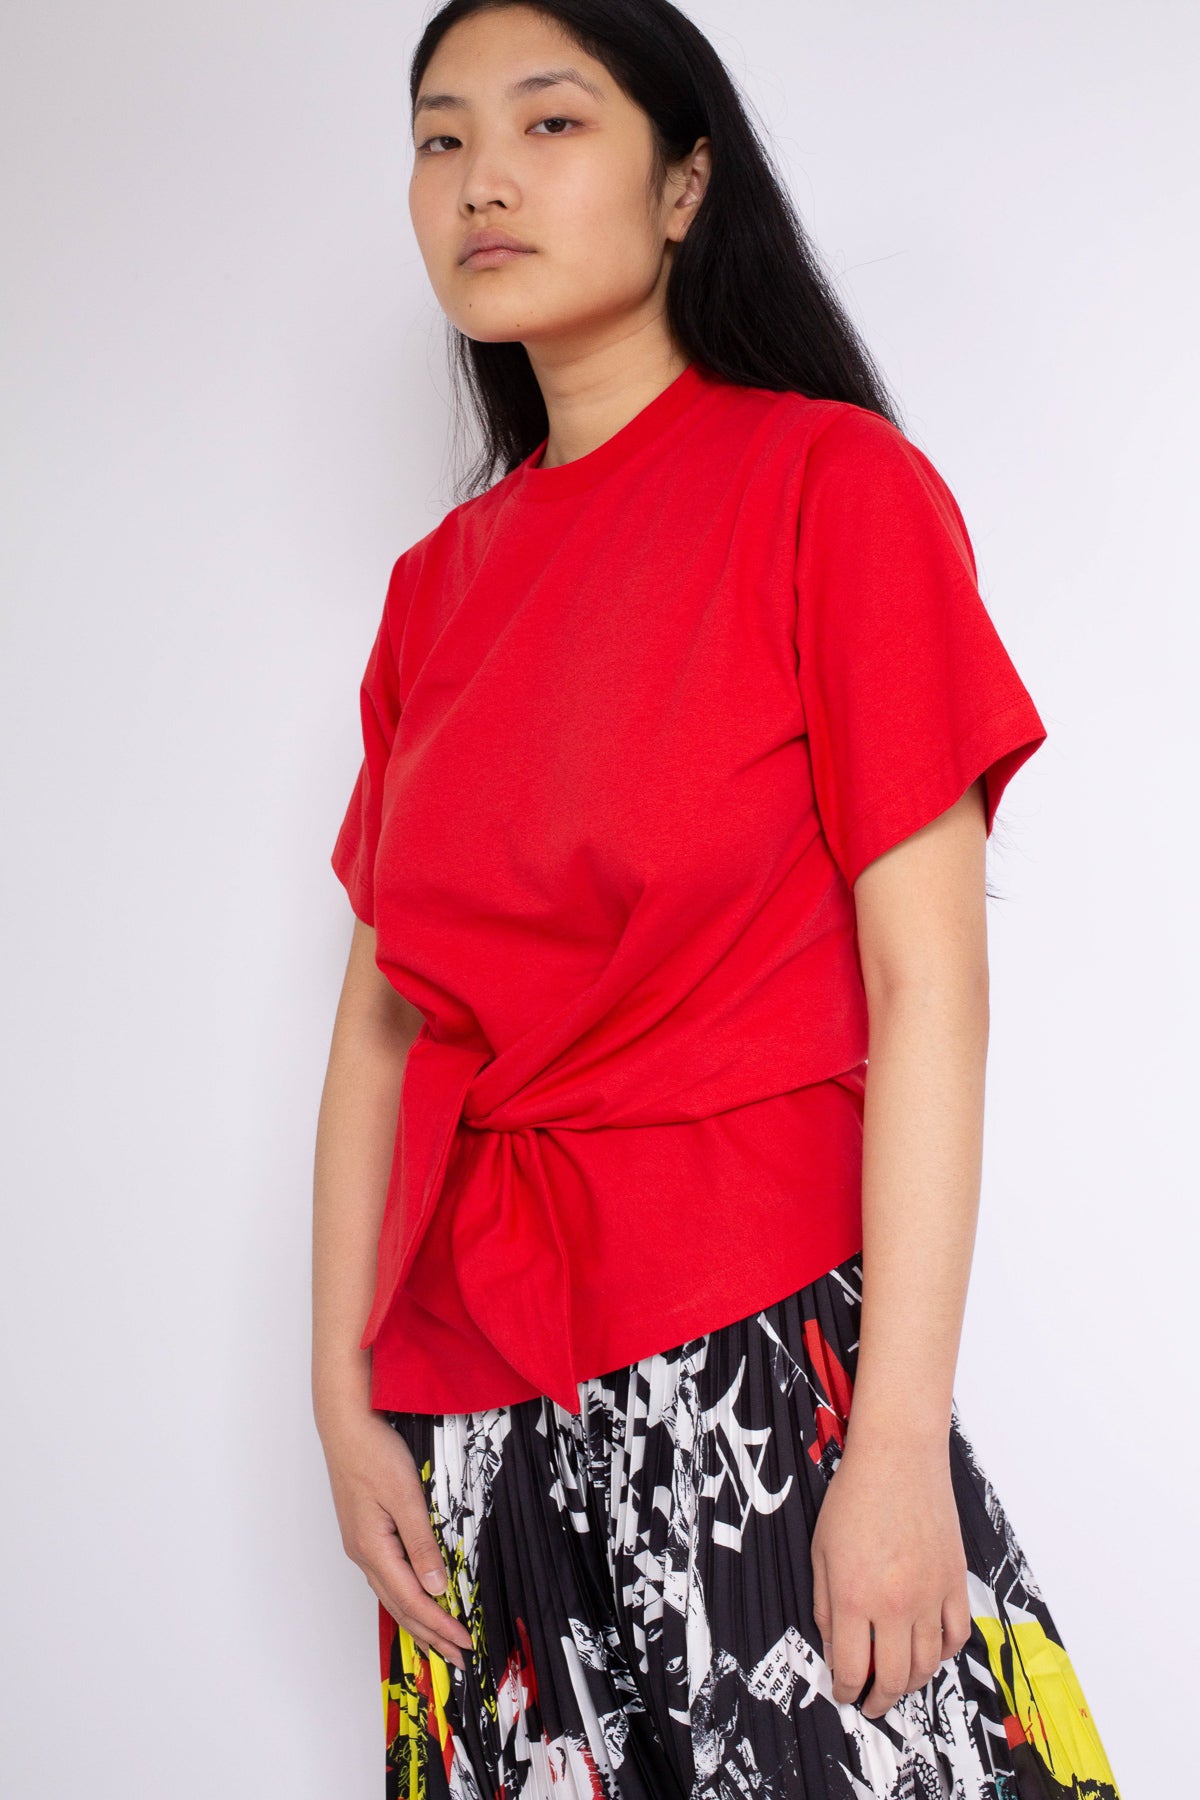 KNOT T-SHIRT IN RED - marques-almeida-dev